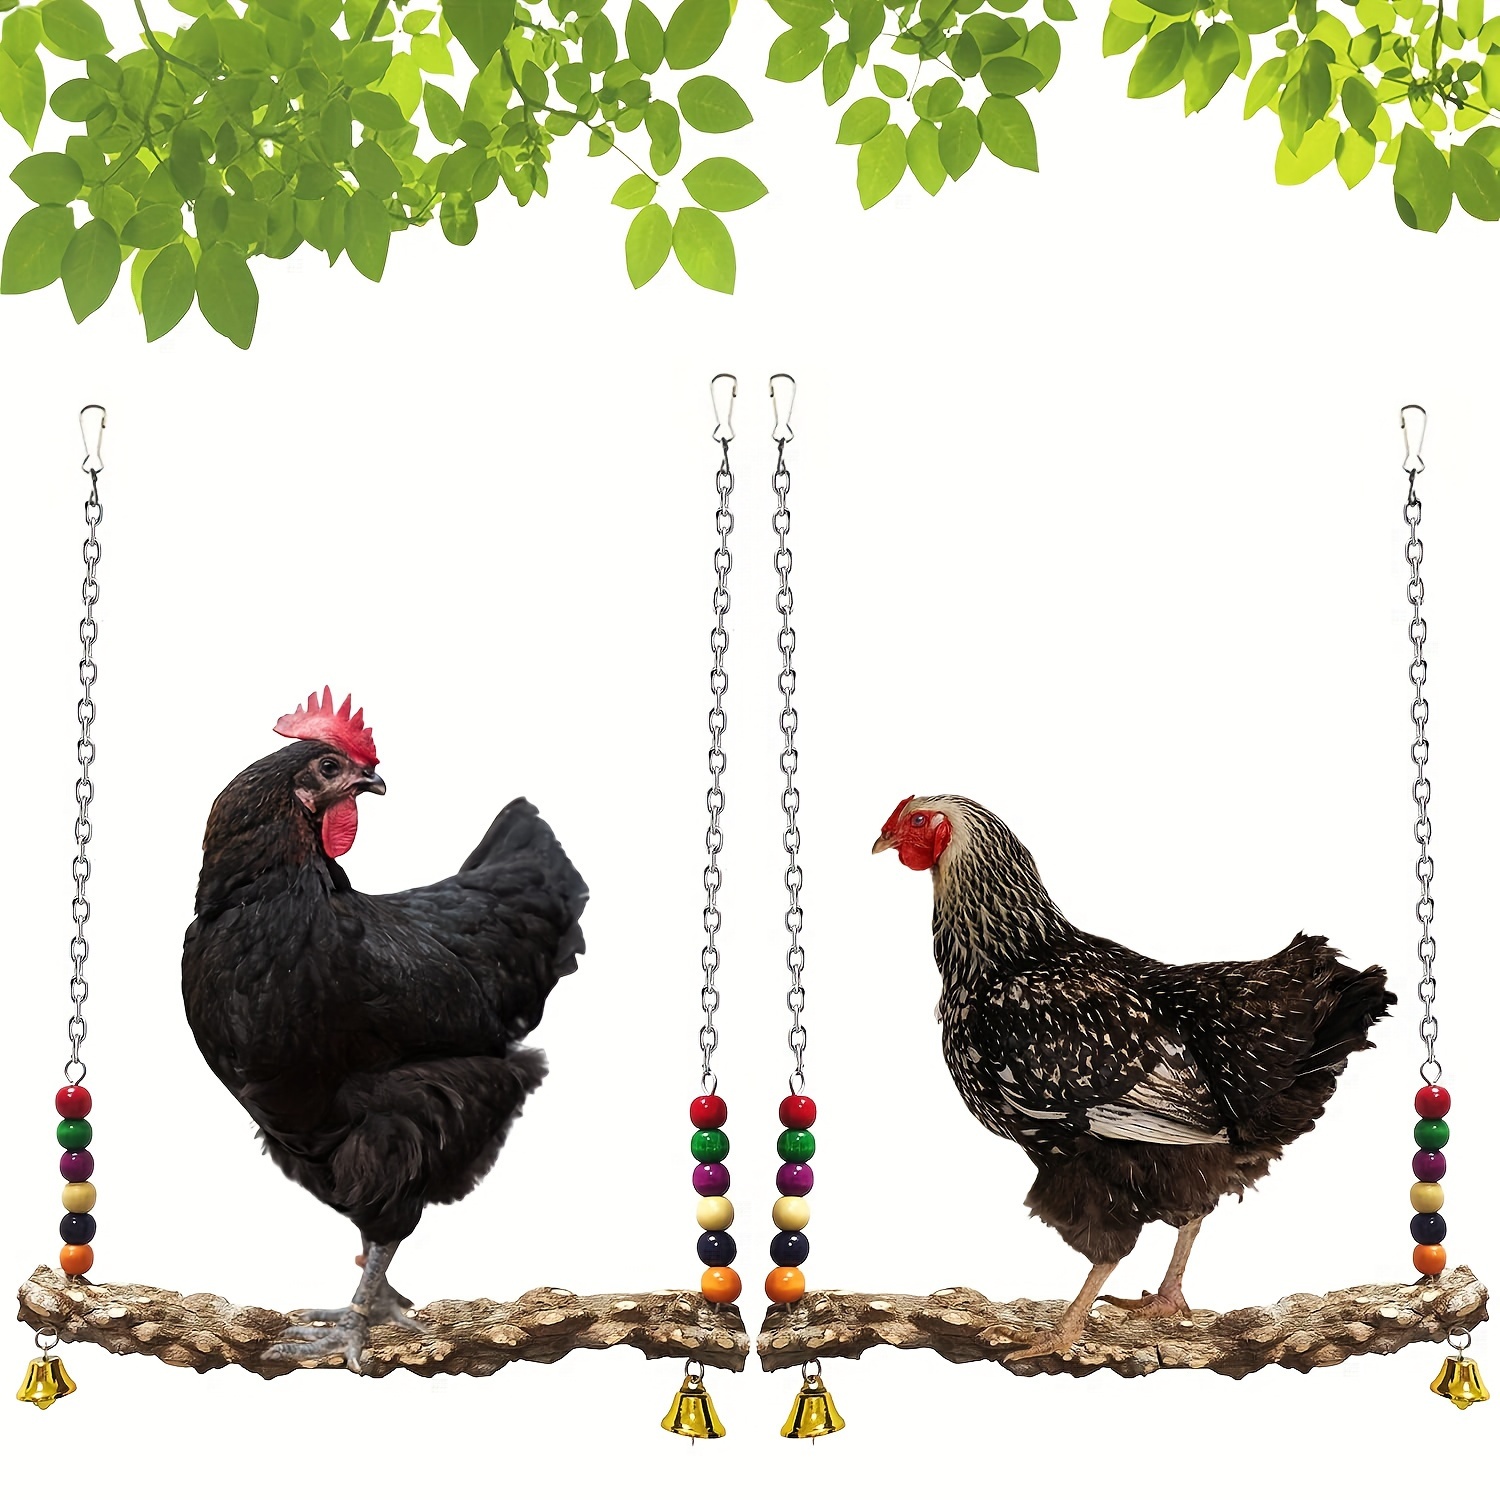 Adjustable Chicken Arms Toys For Costume Cosplay And Decorations